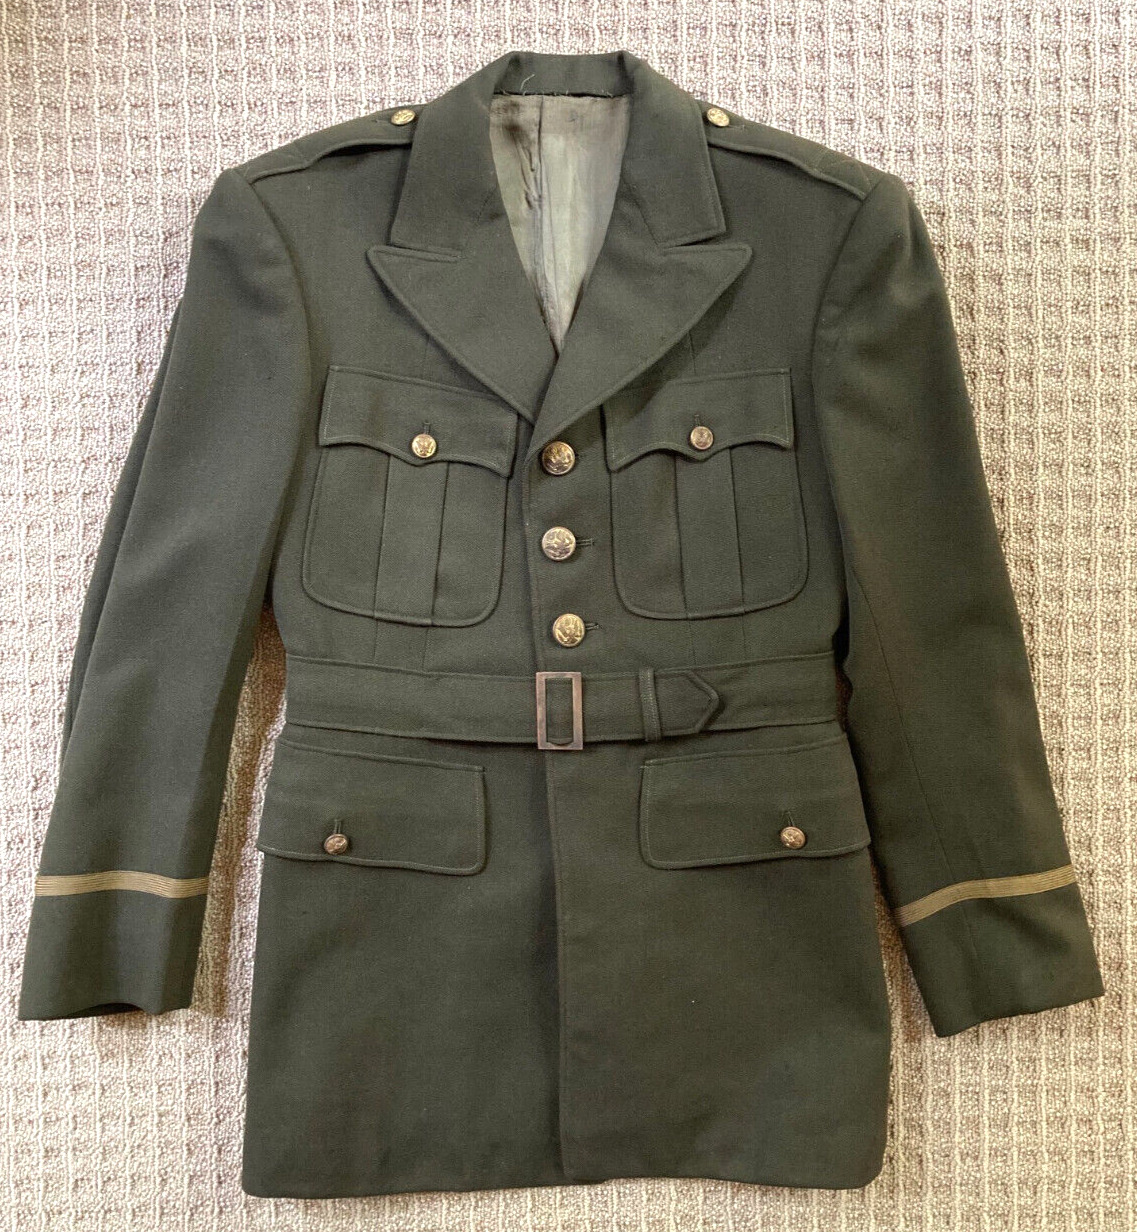 RARE WW2 US ARMY C.I.C. COUNTER INTELLIGENCE CORPS M1940 SERV. COAT TAILOR MADE